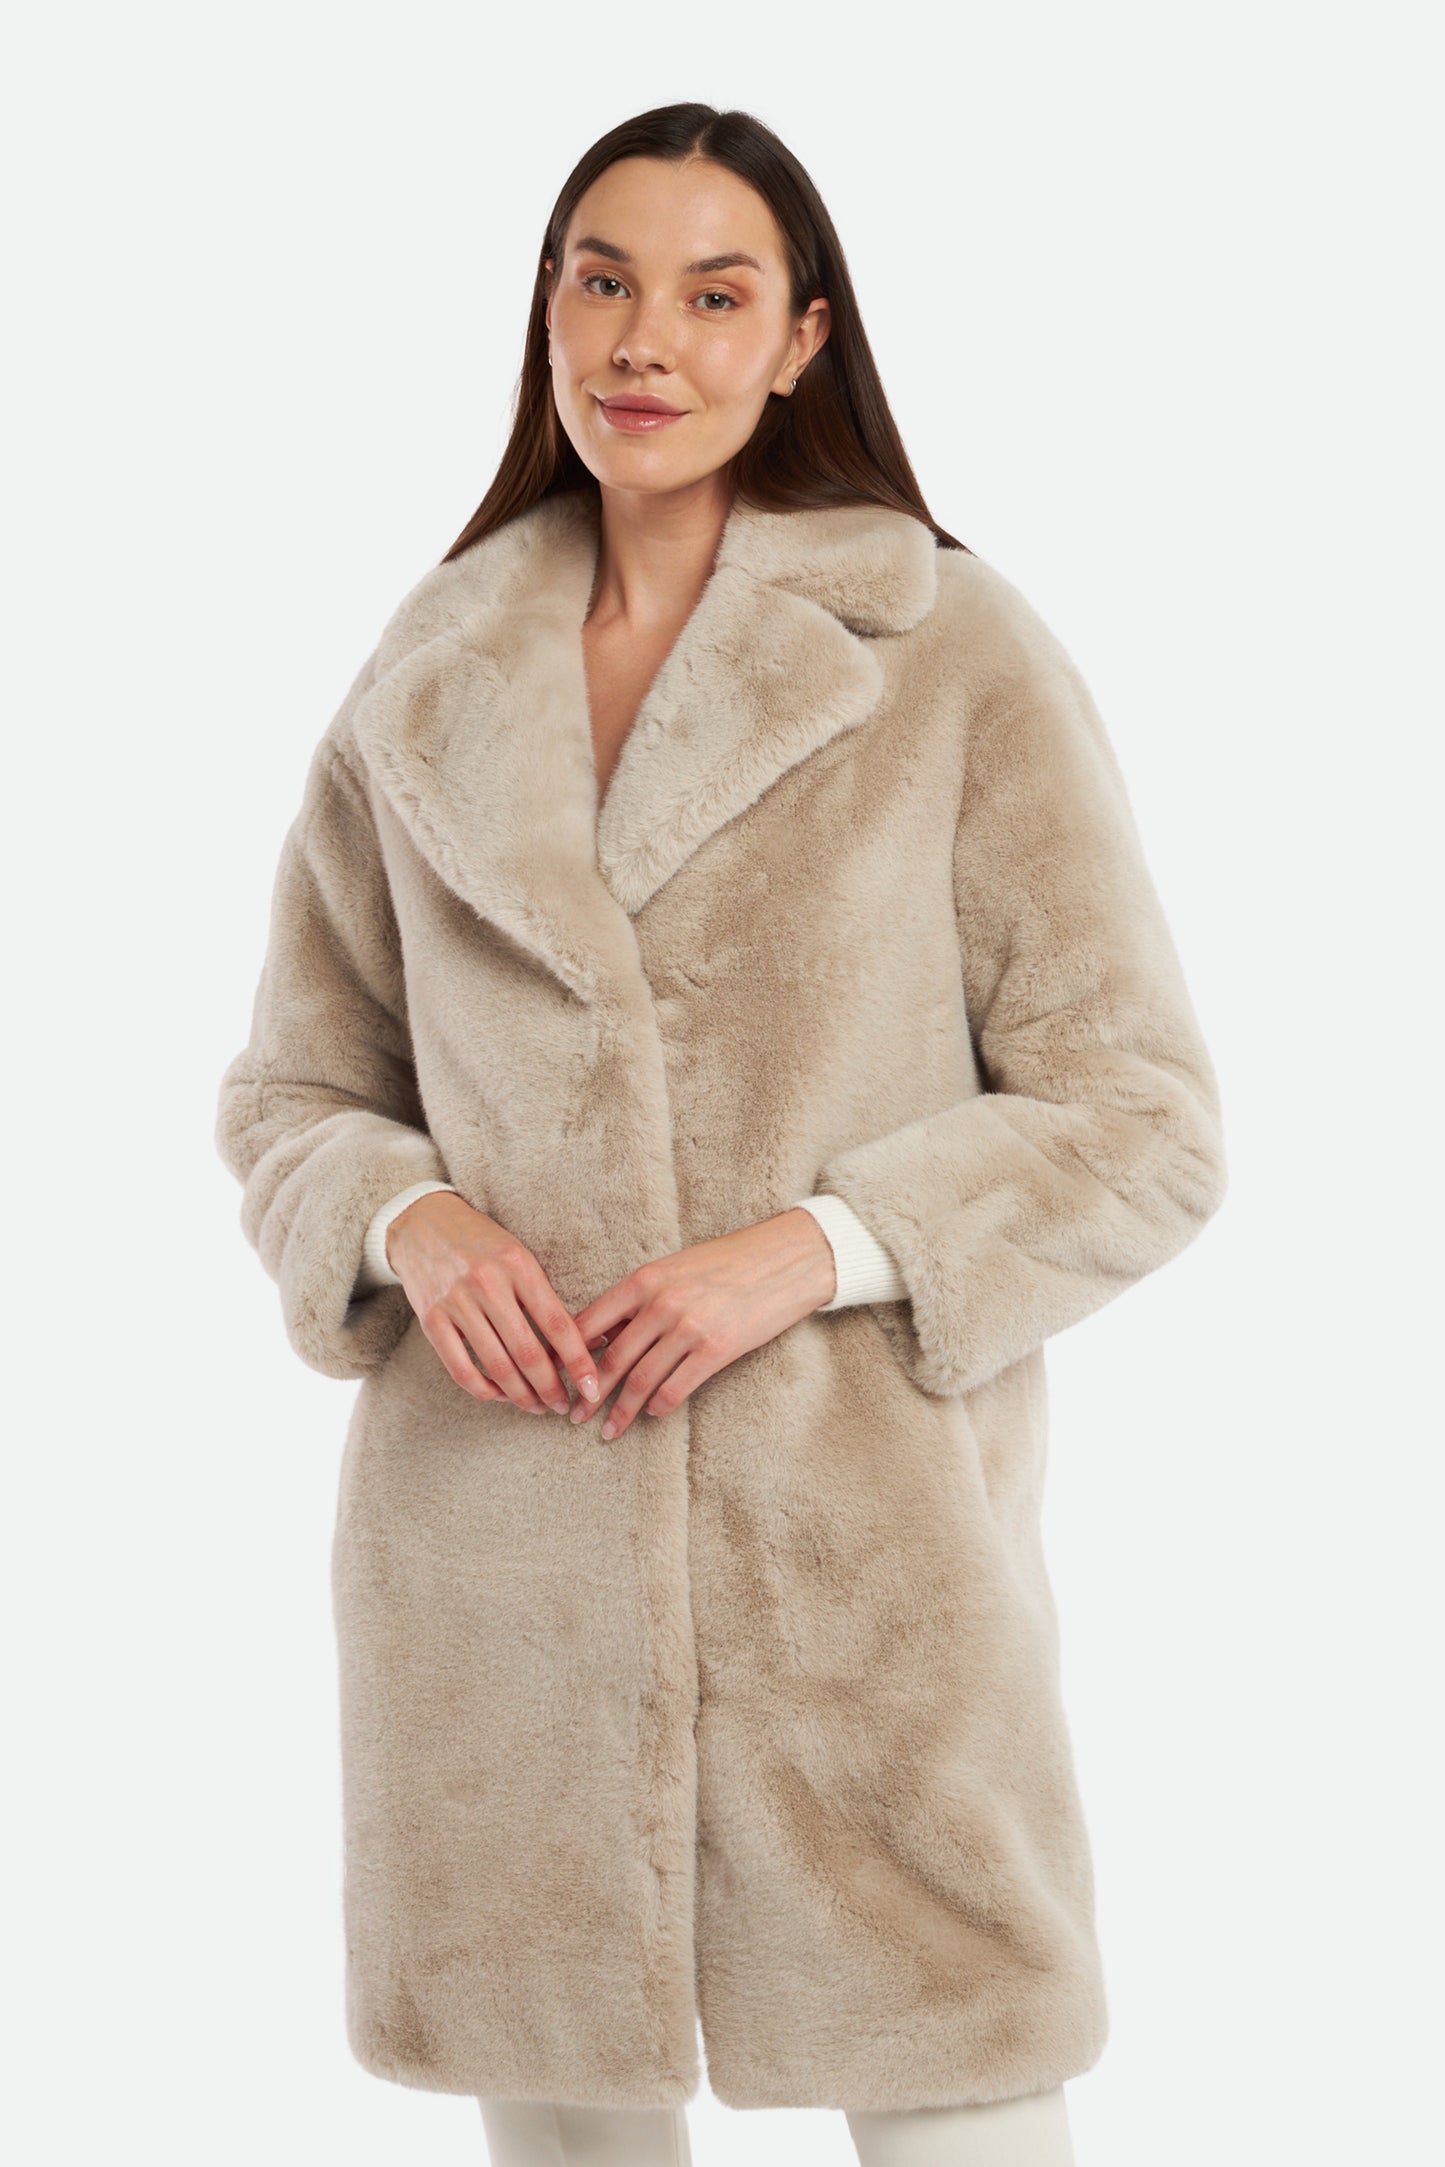 Stand Studio Camille Cocoon White Coat